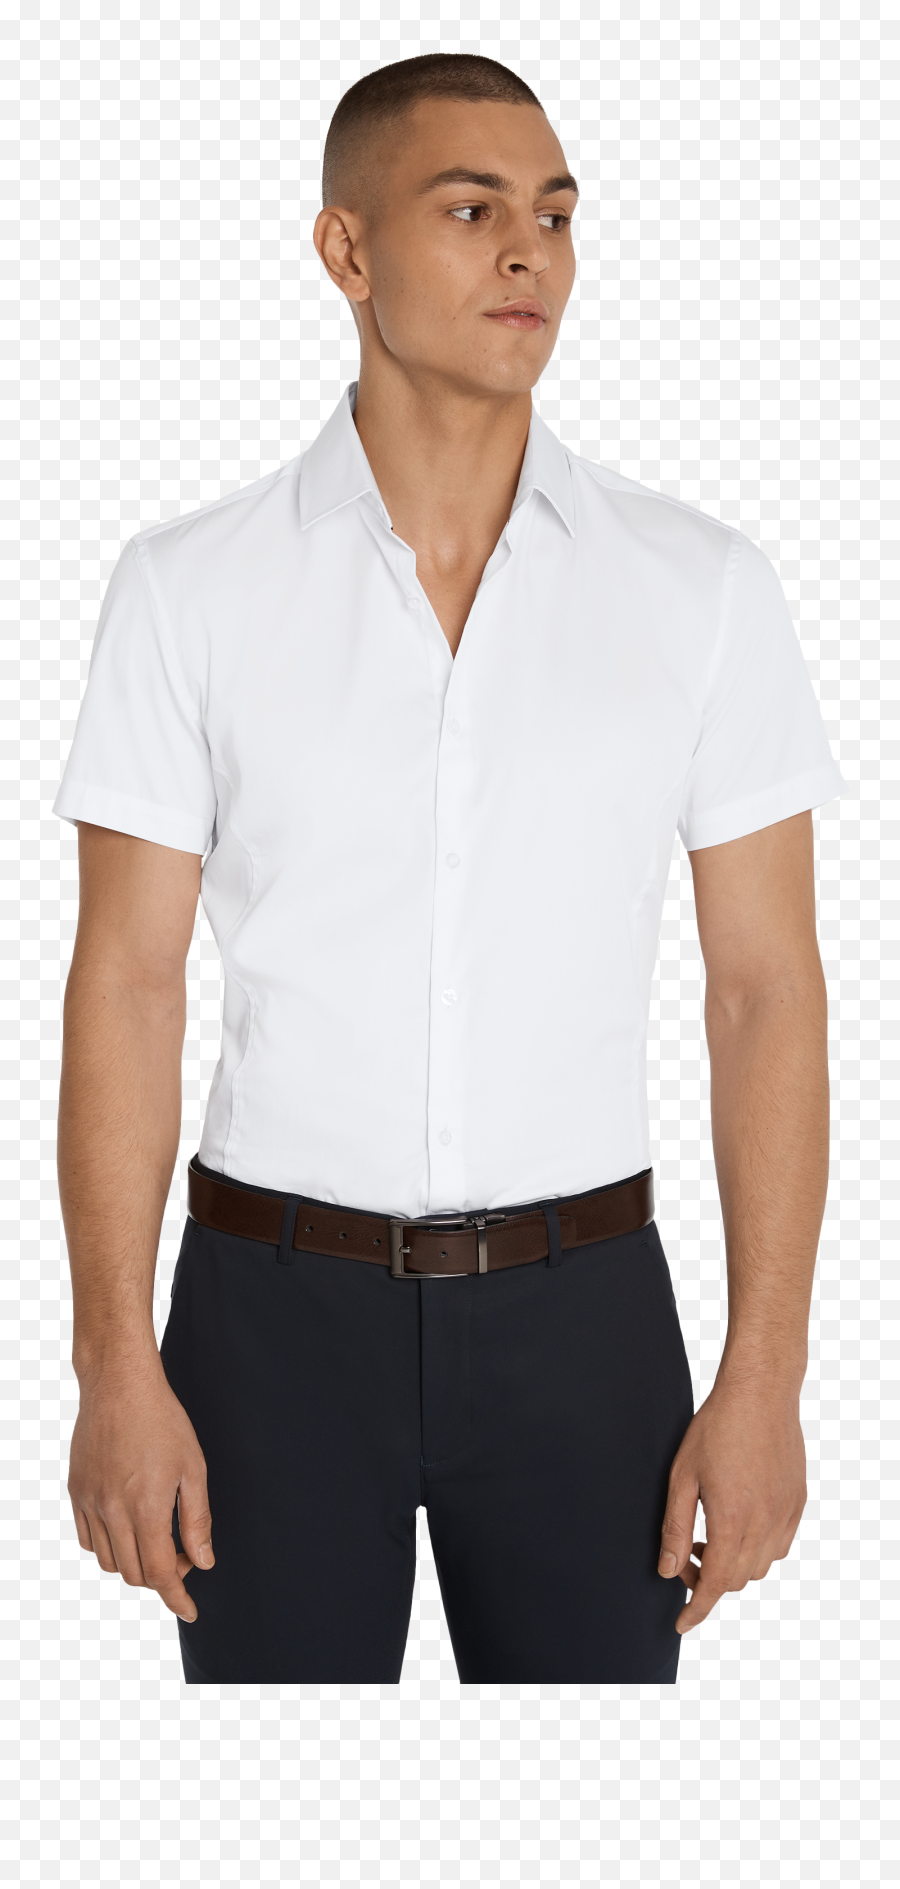 White Jason Muscle Fit Shirt Menu0027s Apparel Tarocash - Short Sleeve Emoji,A Dress, Shirt And Tie, Jeans And A Horse Emoticon